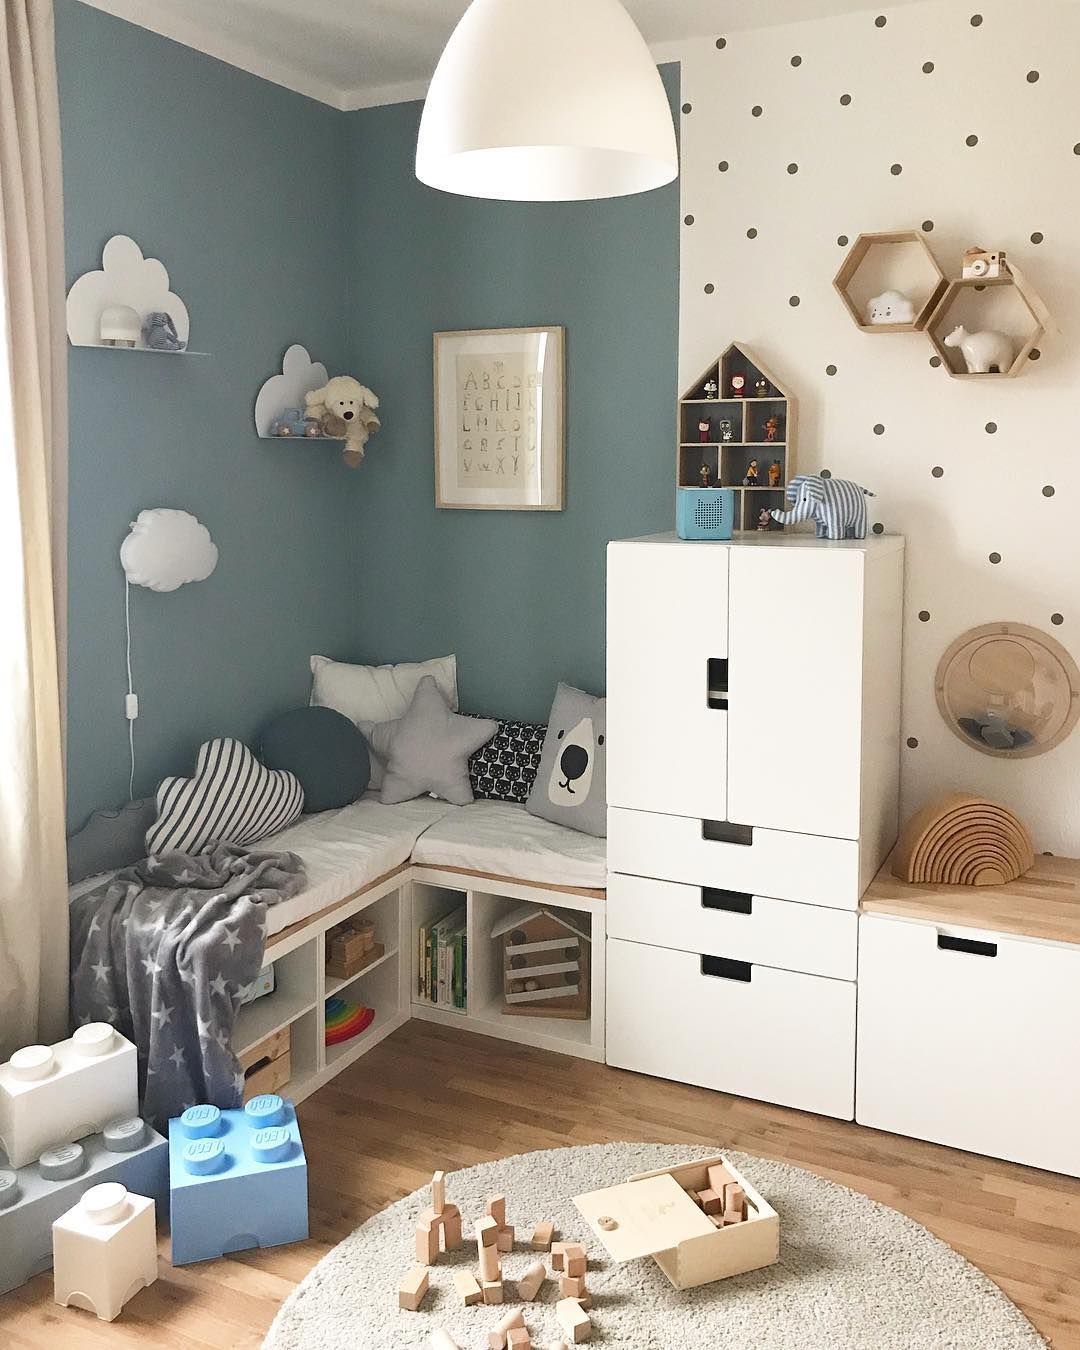 30+ Stylish & Chic Kids Room Decorating Ideas - for Girls & Boys -   18 room decor for kids ideas